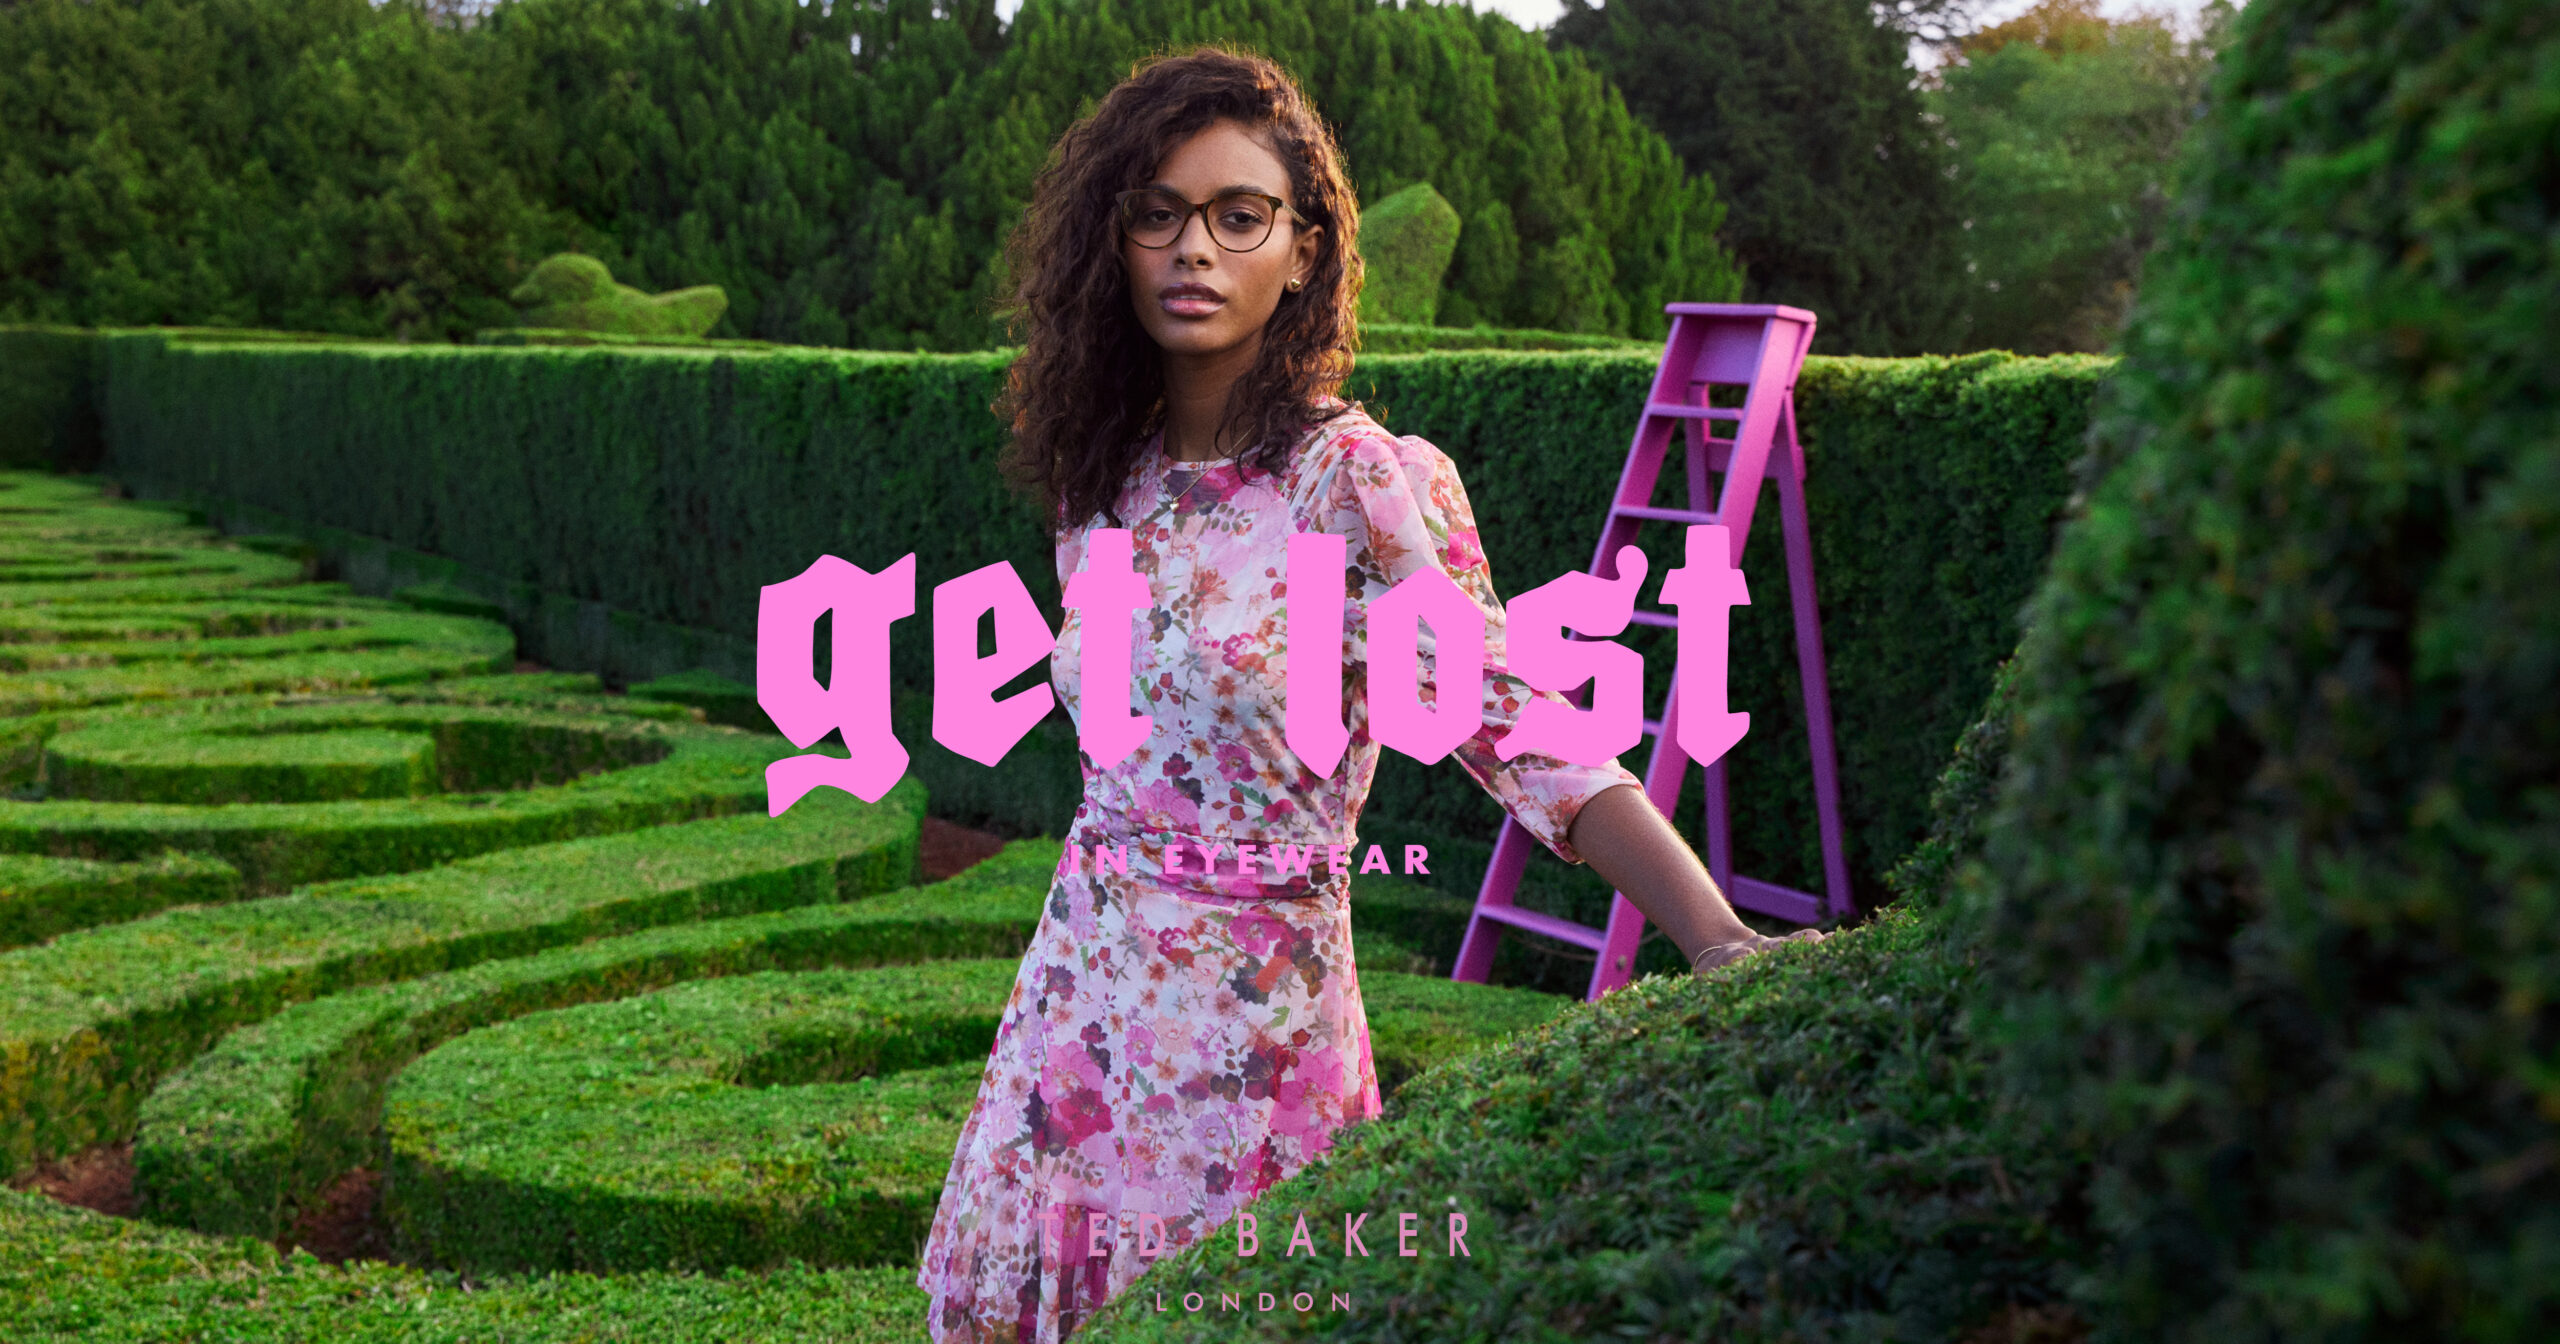 Ted Baker 'Get Lost in Eyewear' women's optical campaign image